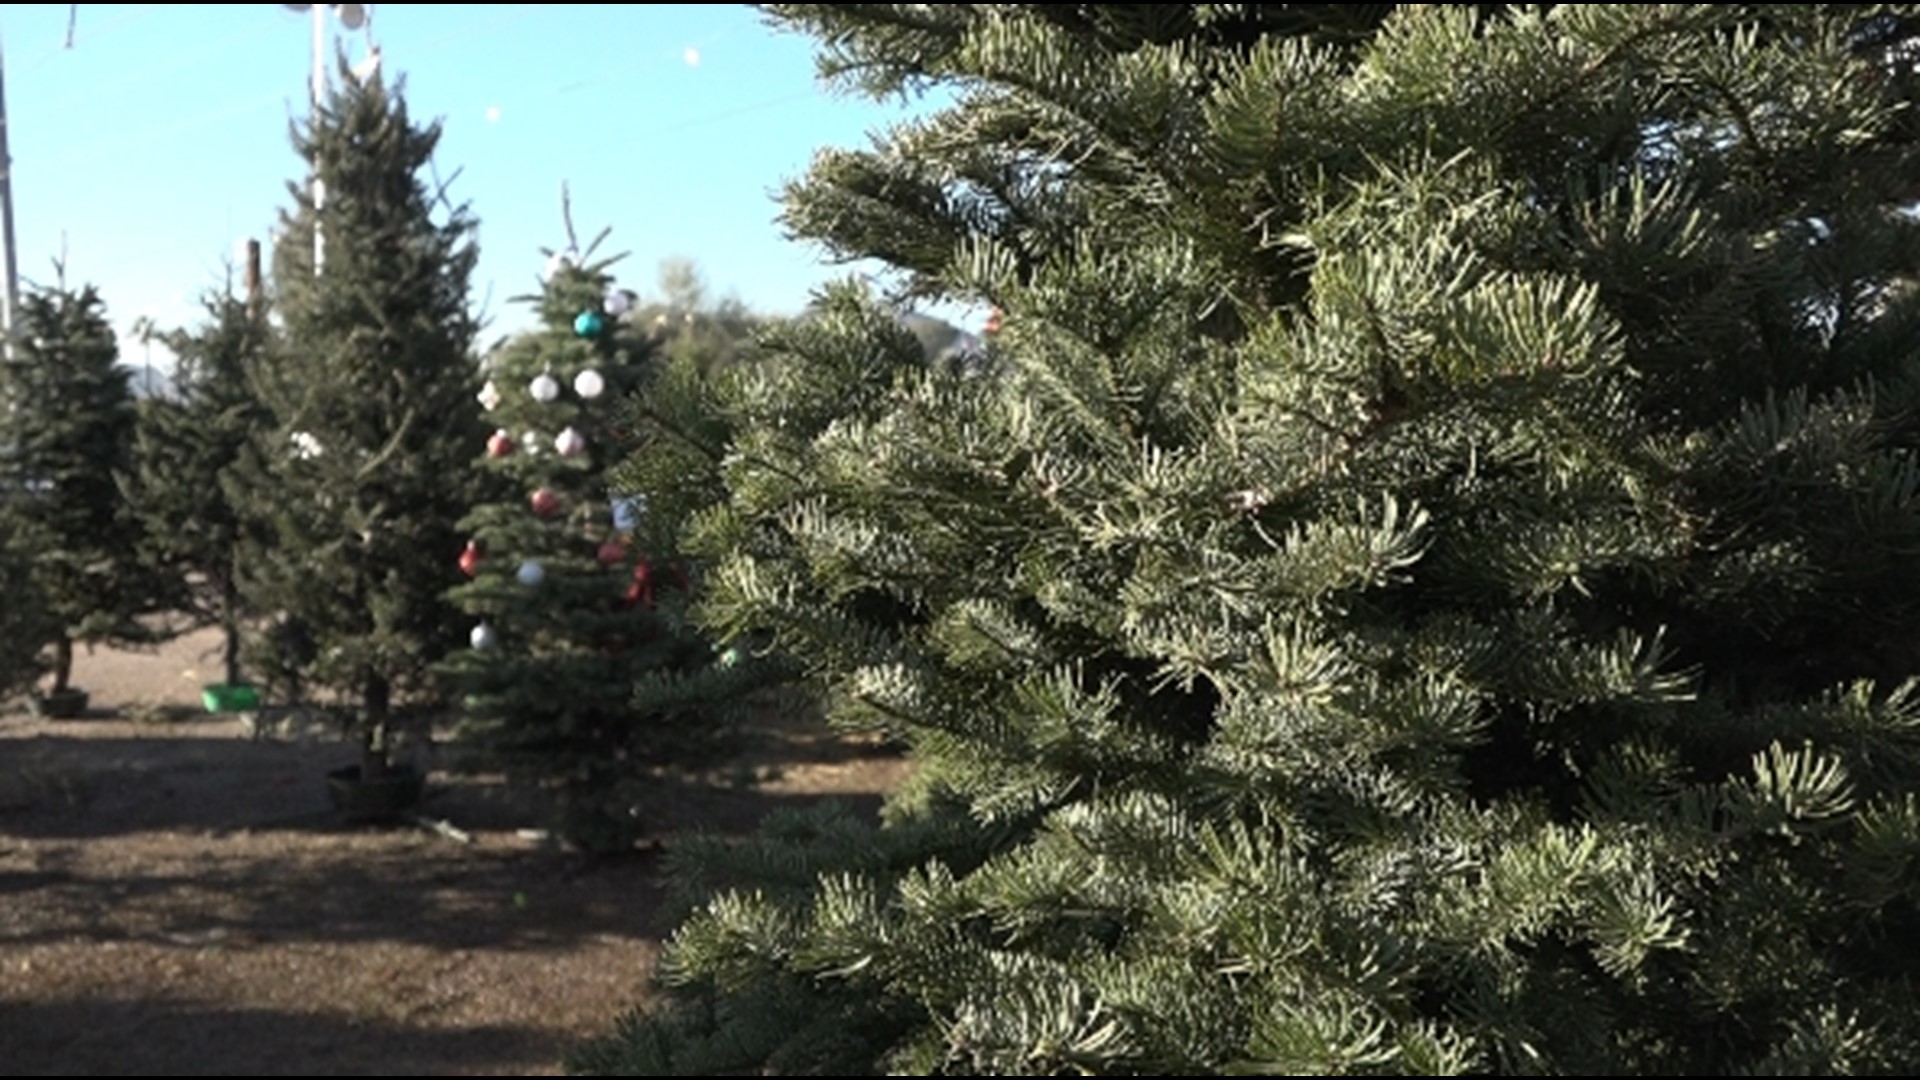 This year, trees can range from $50 bucks for a table topper all the way up to a few hundred dollars for a big one.